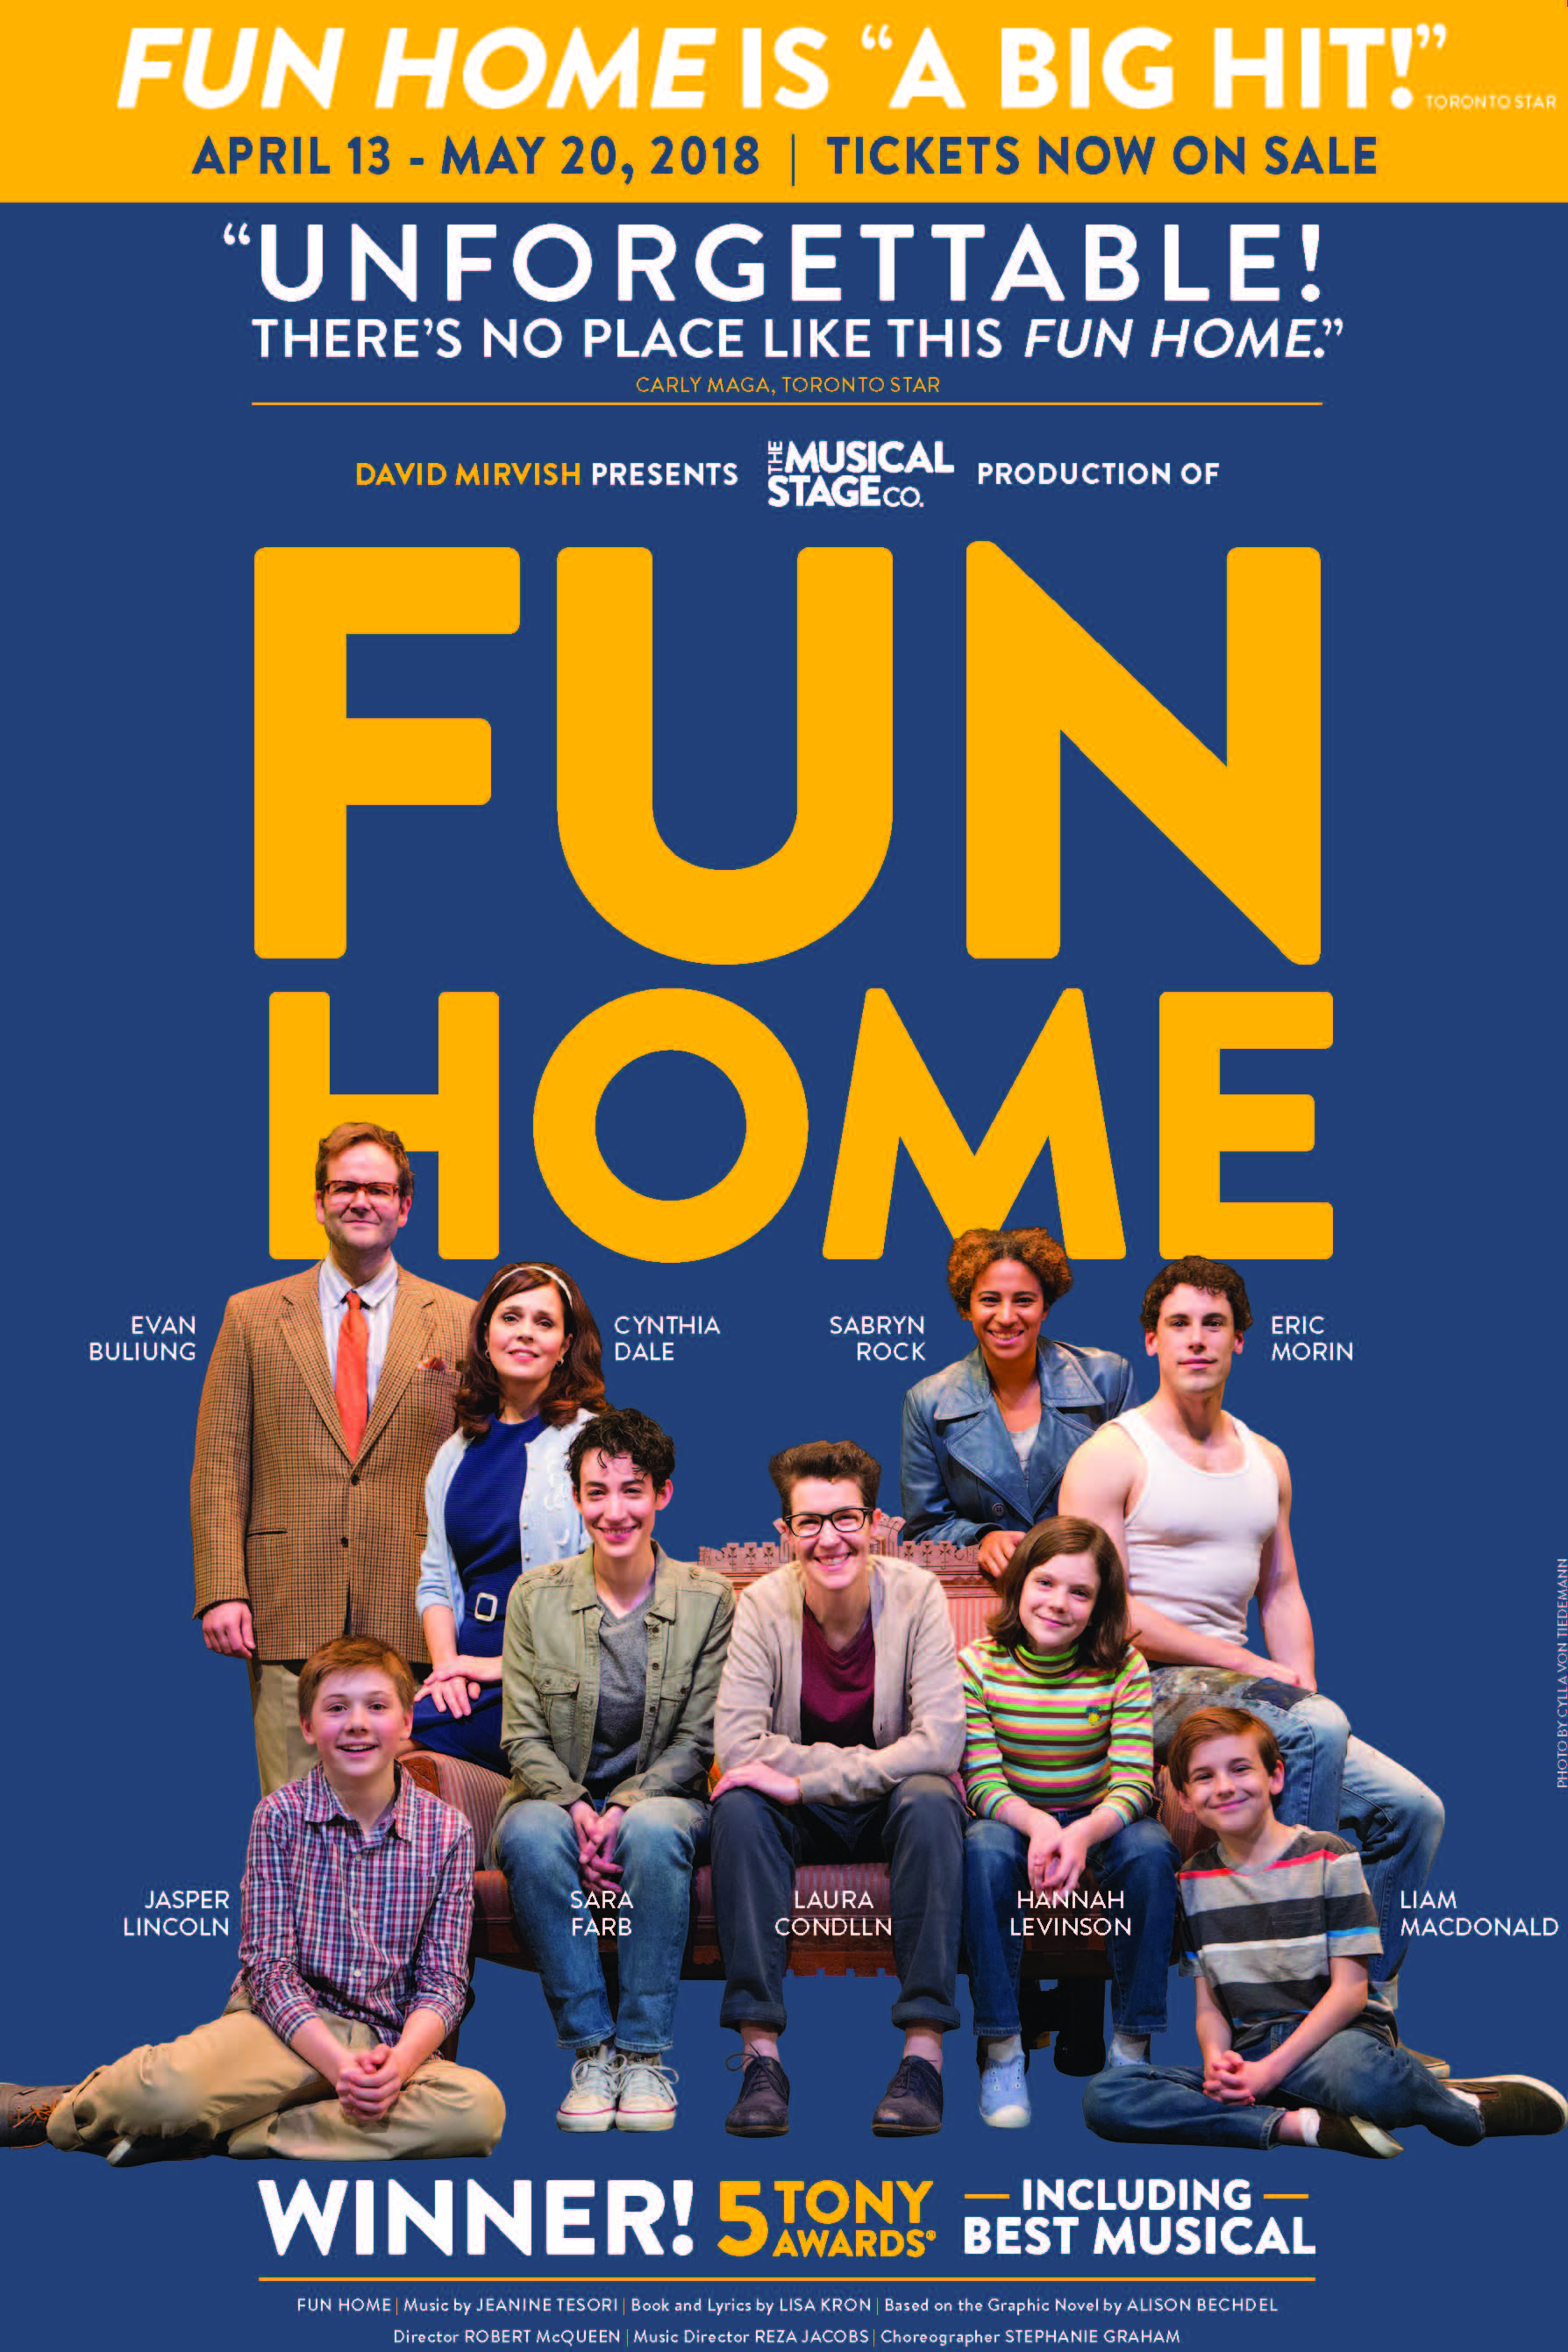 Fun Home (The Musical Stage Company)